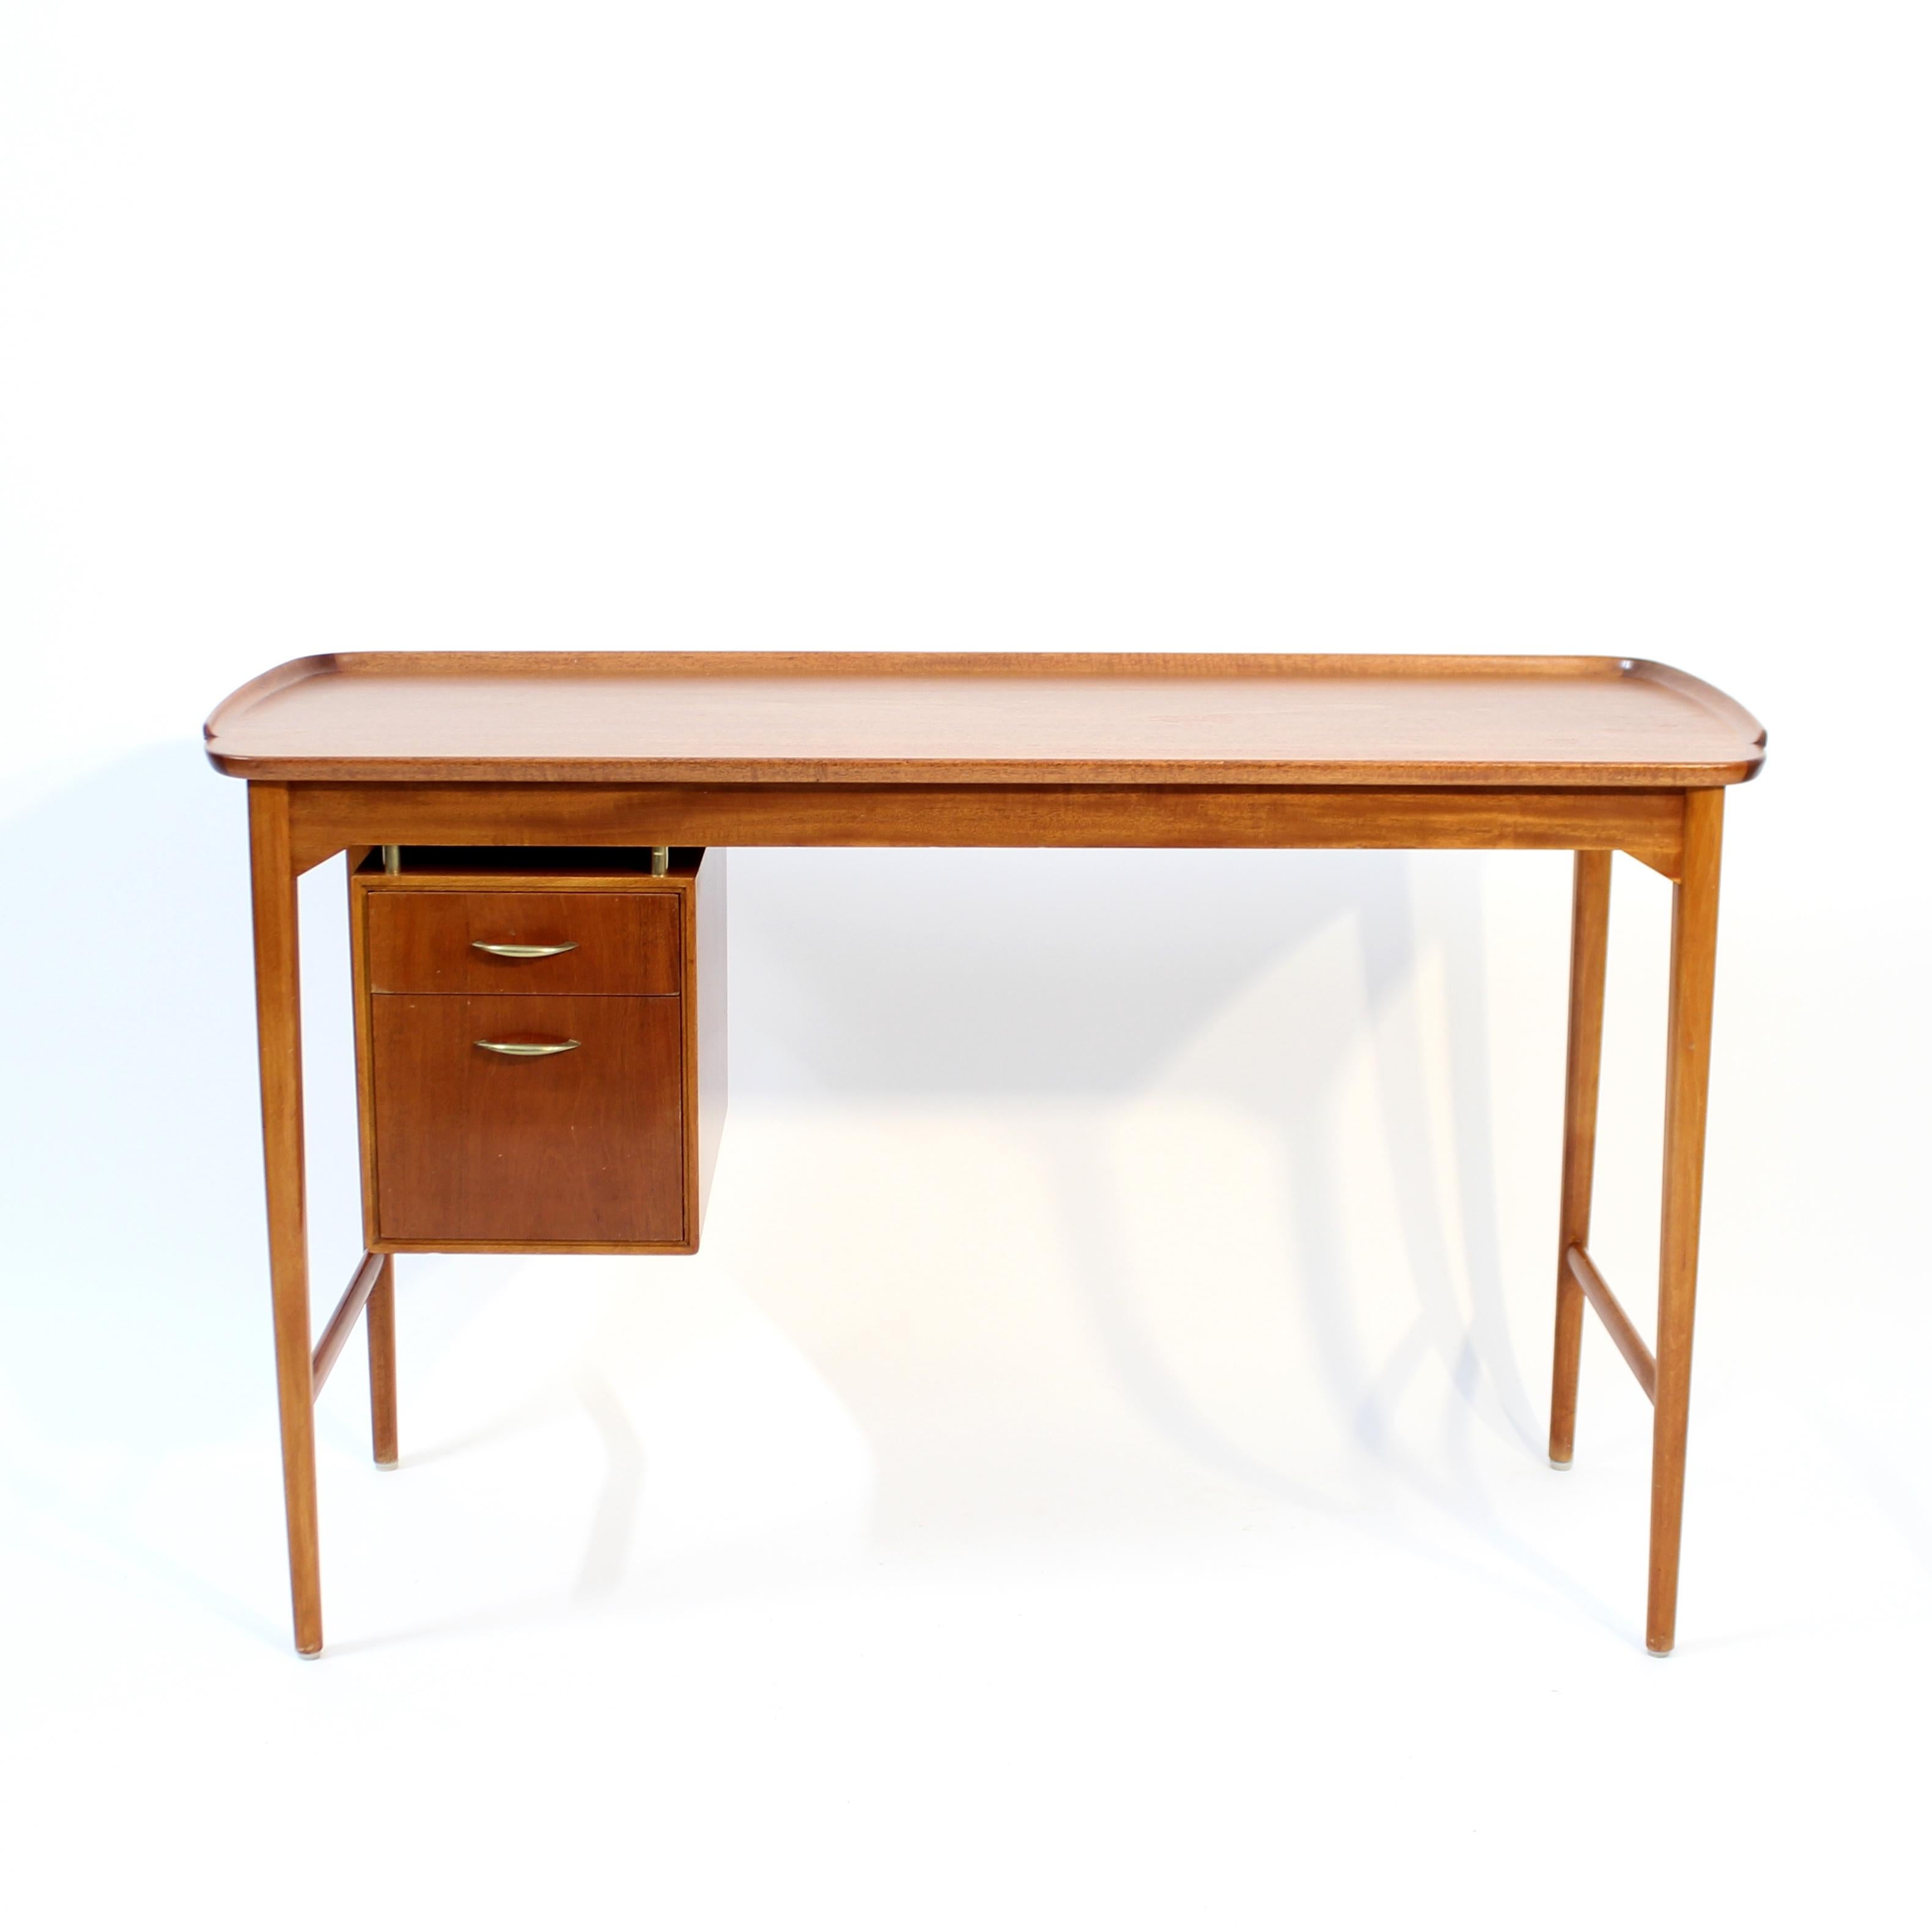 20th Century Scandinavian Mahogany free standing desk with two drawers, 1950s